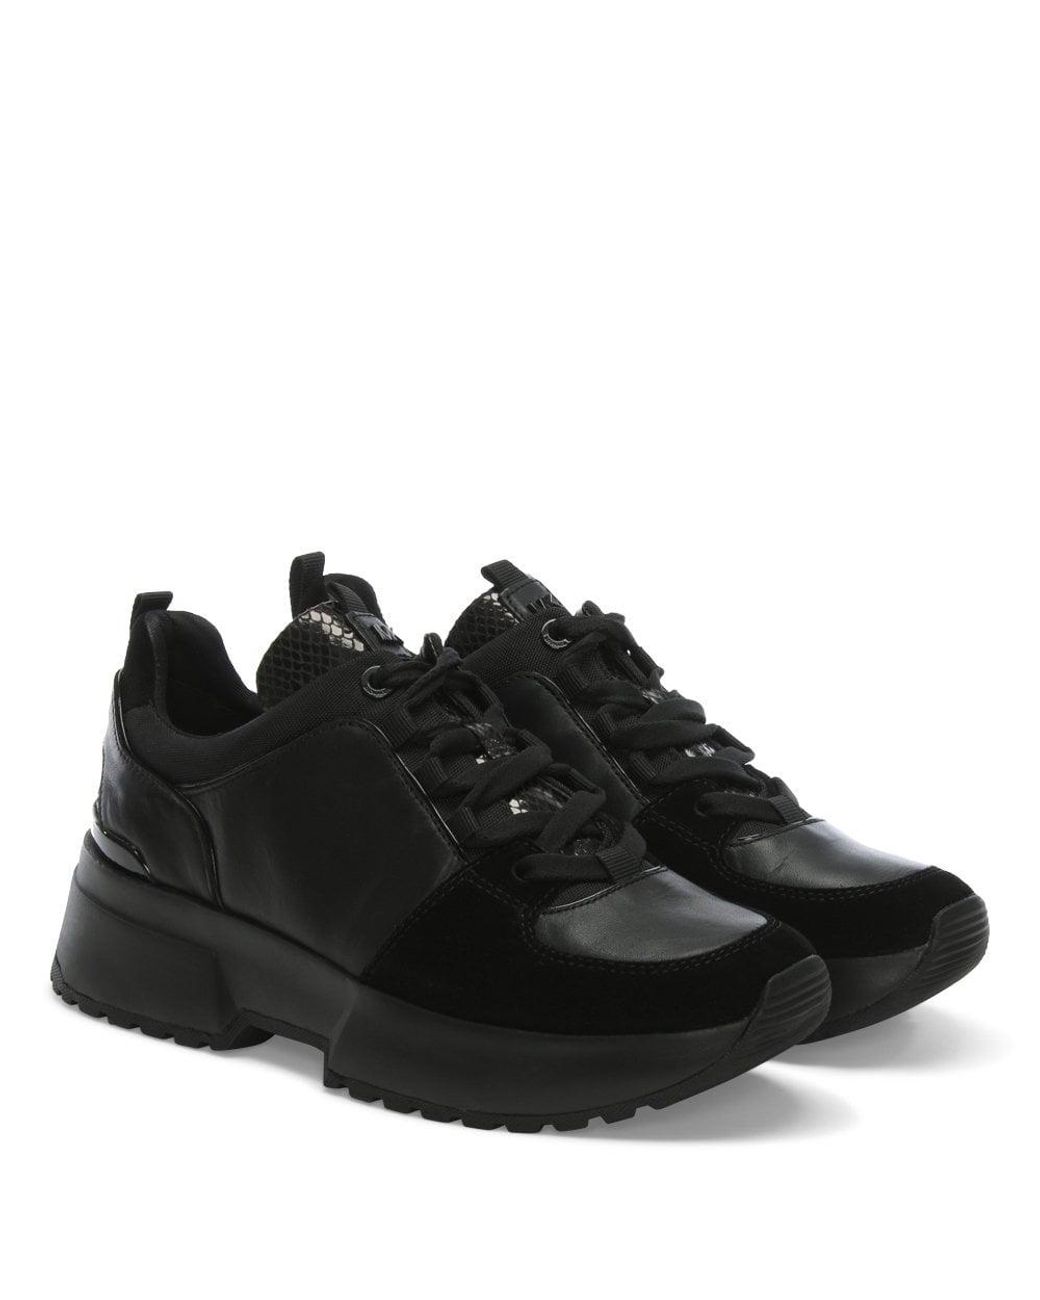 Michael Kors Shoes Sneakers Cosmo 